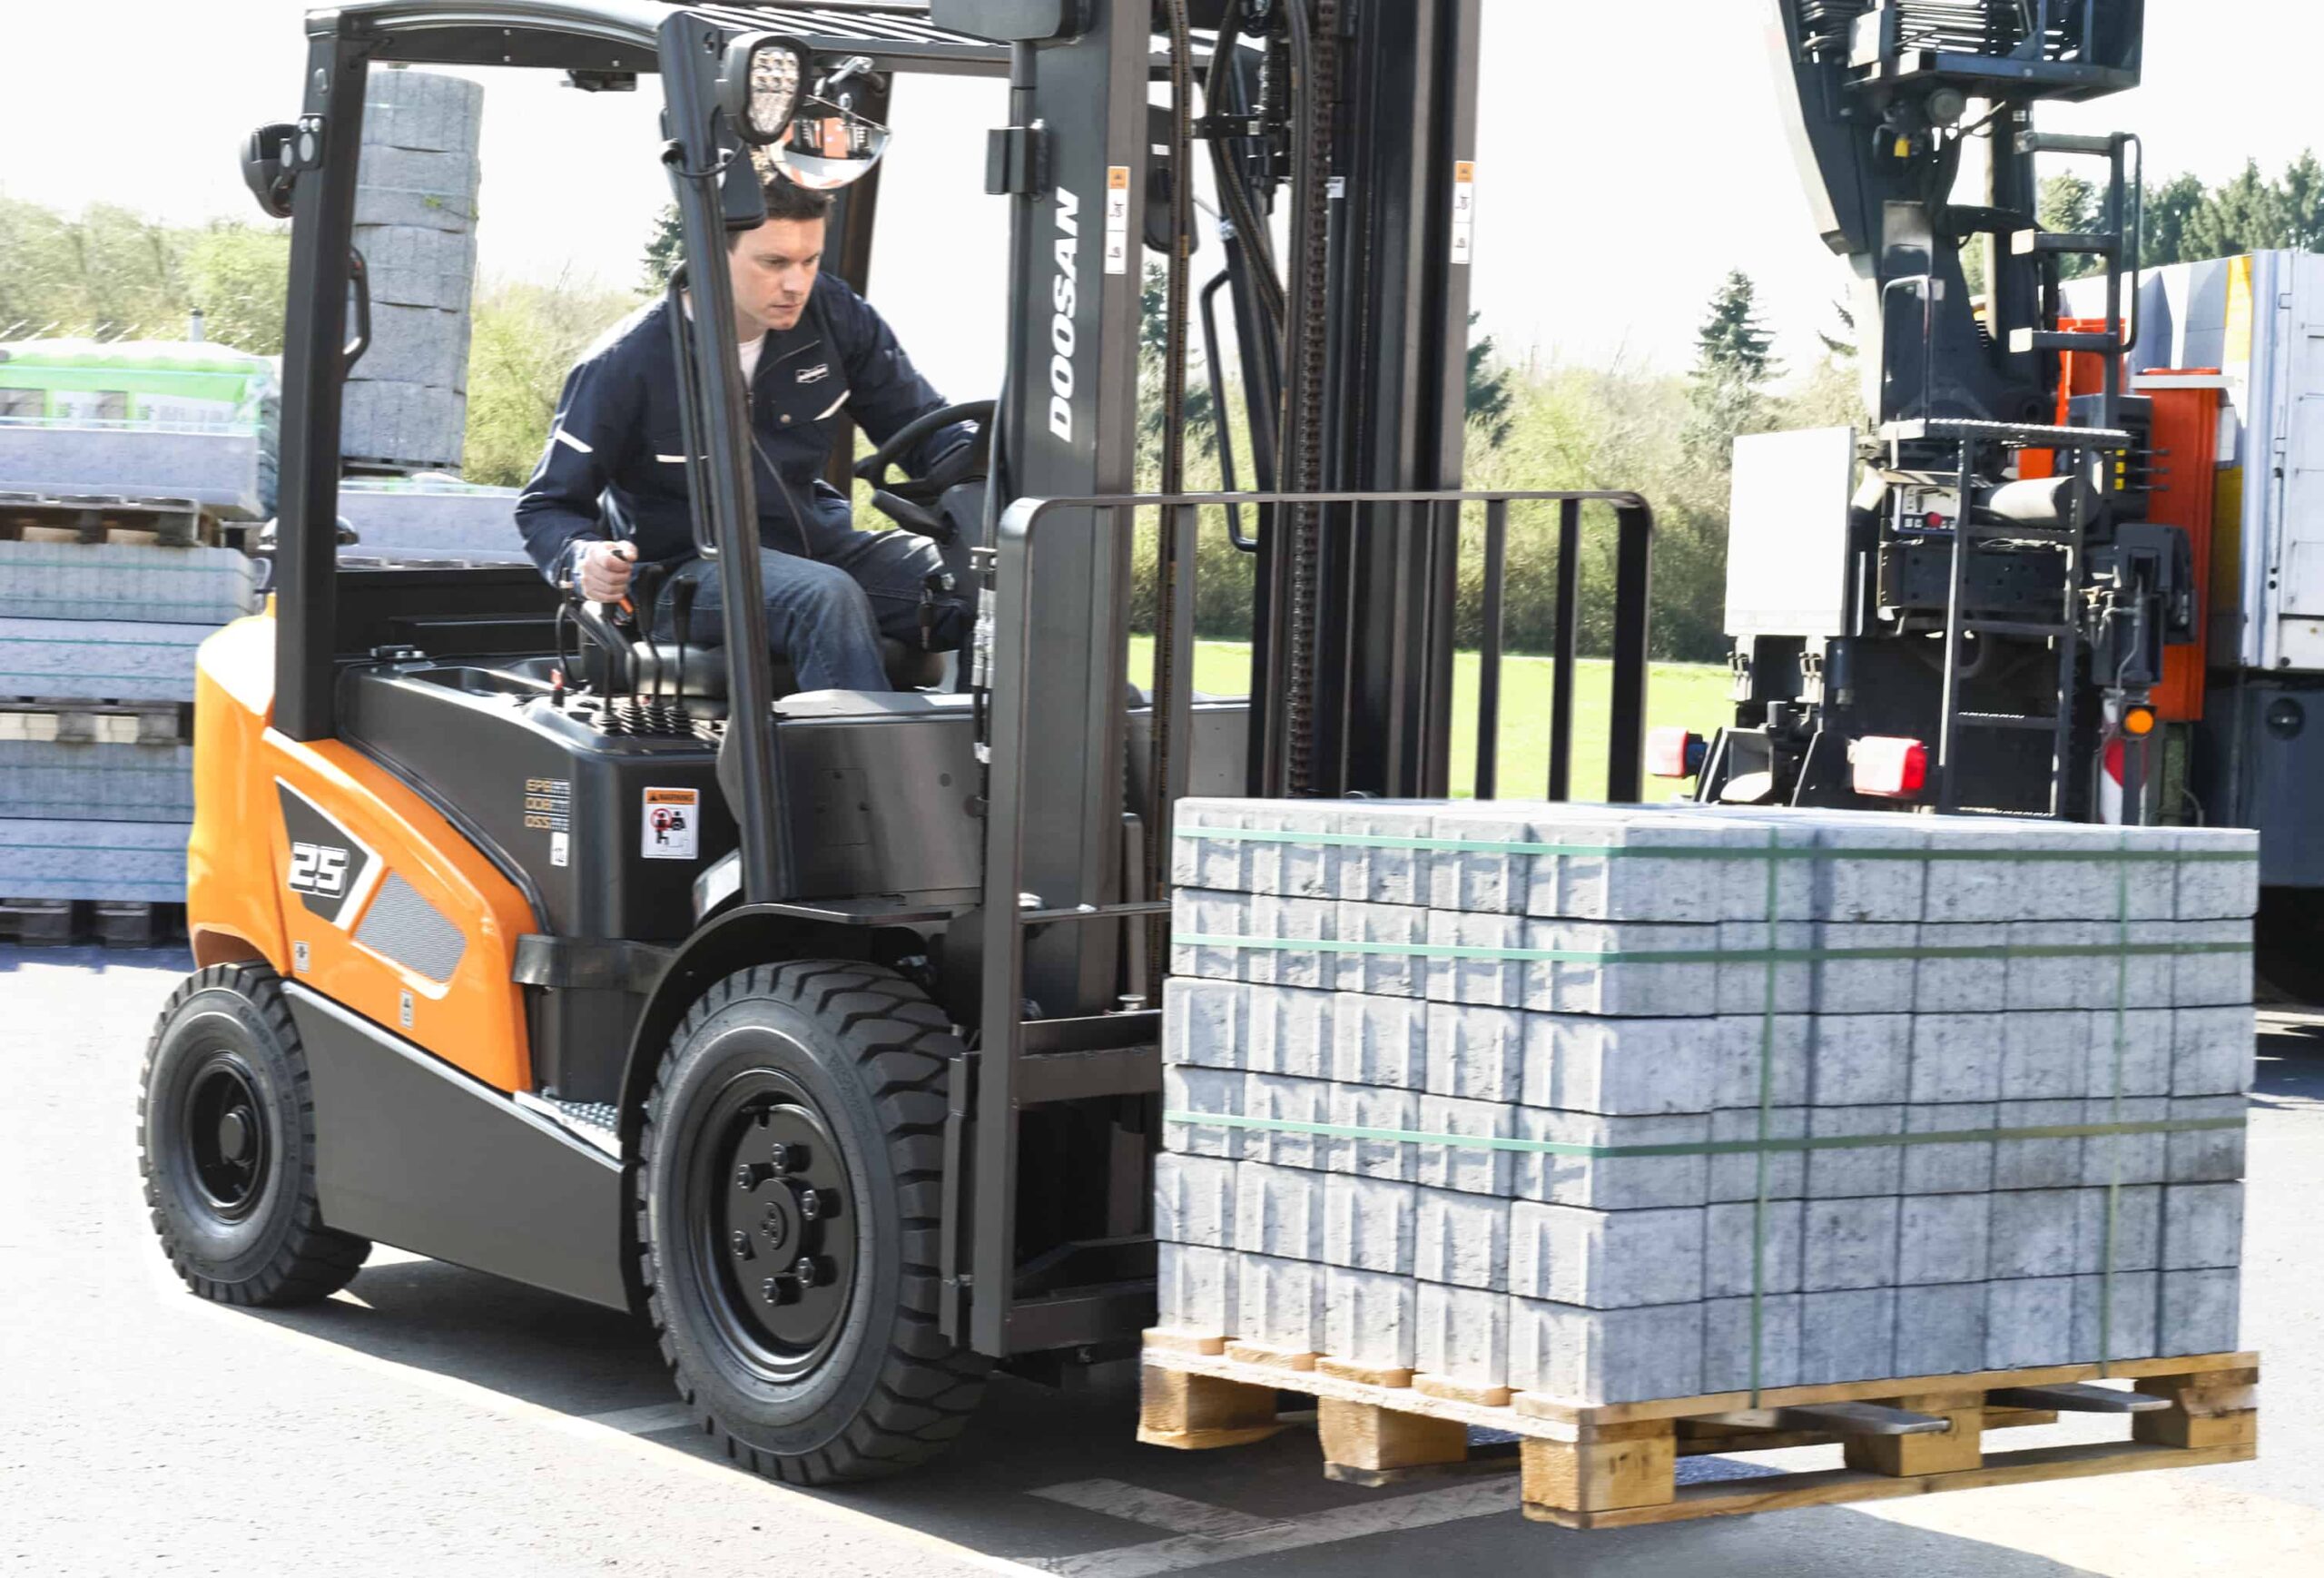 Doosan expands Euro Stage V compliant 9-Series forklifts with 2.0-3.5t capacity models